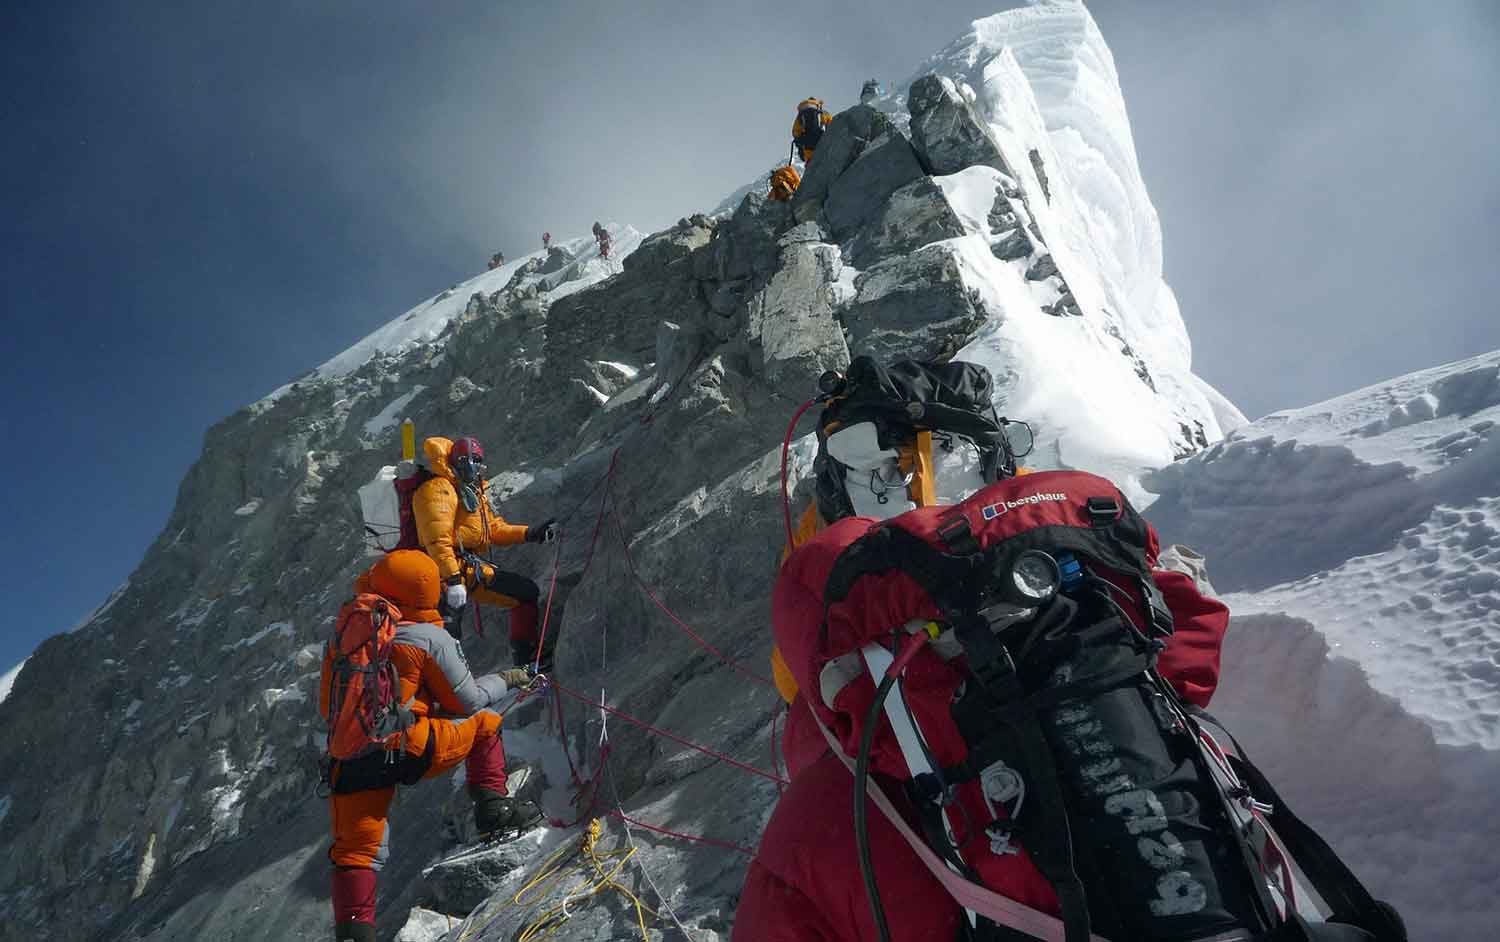 Several people with ropes, oxygen tanks, and other gear climb up the side of a mountain.